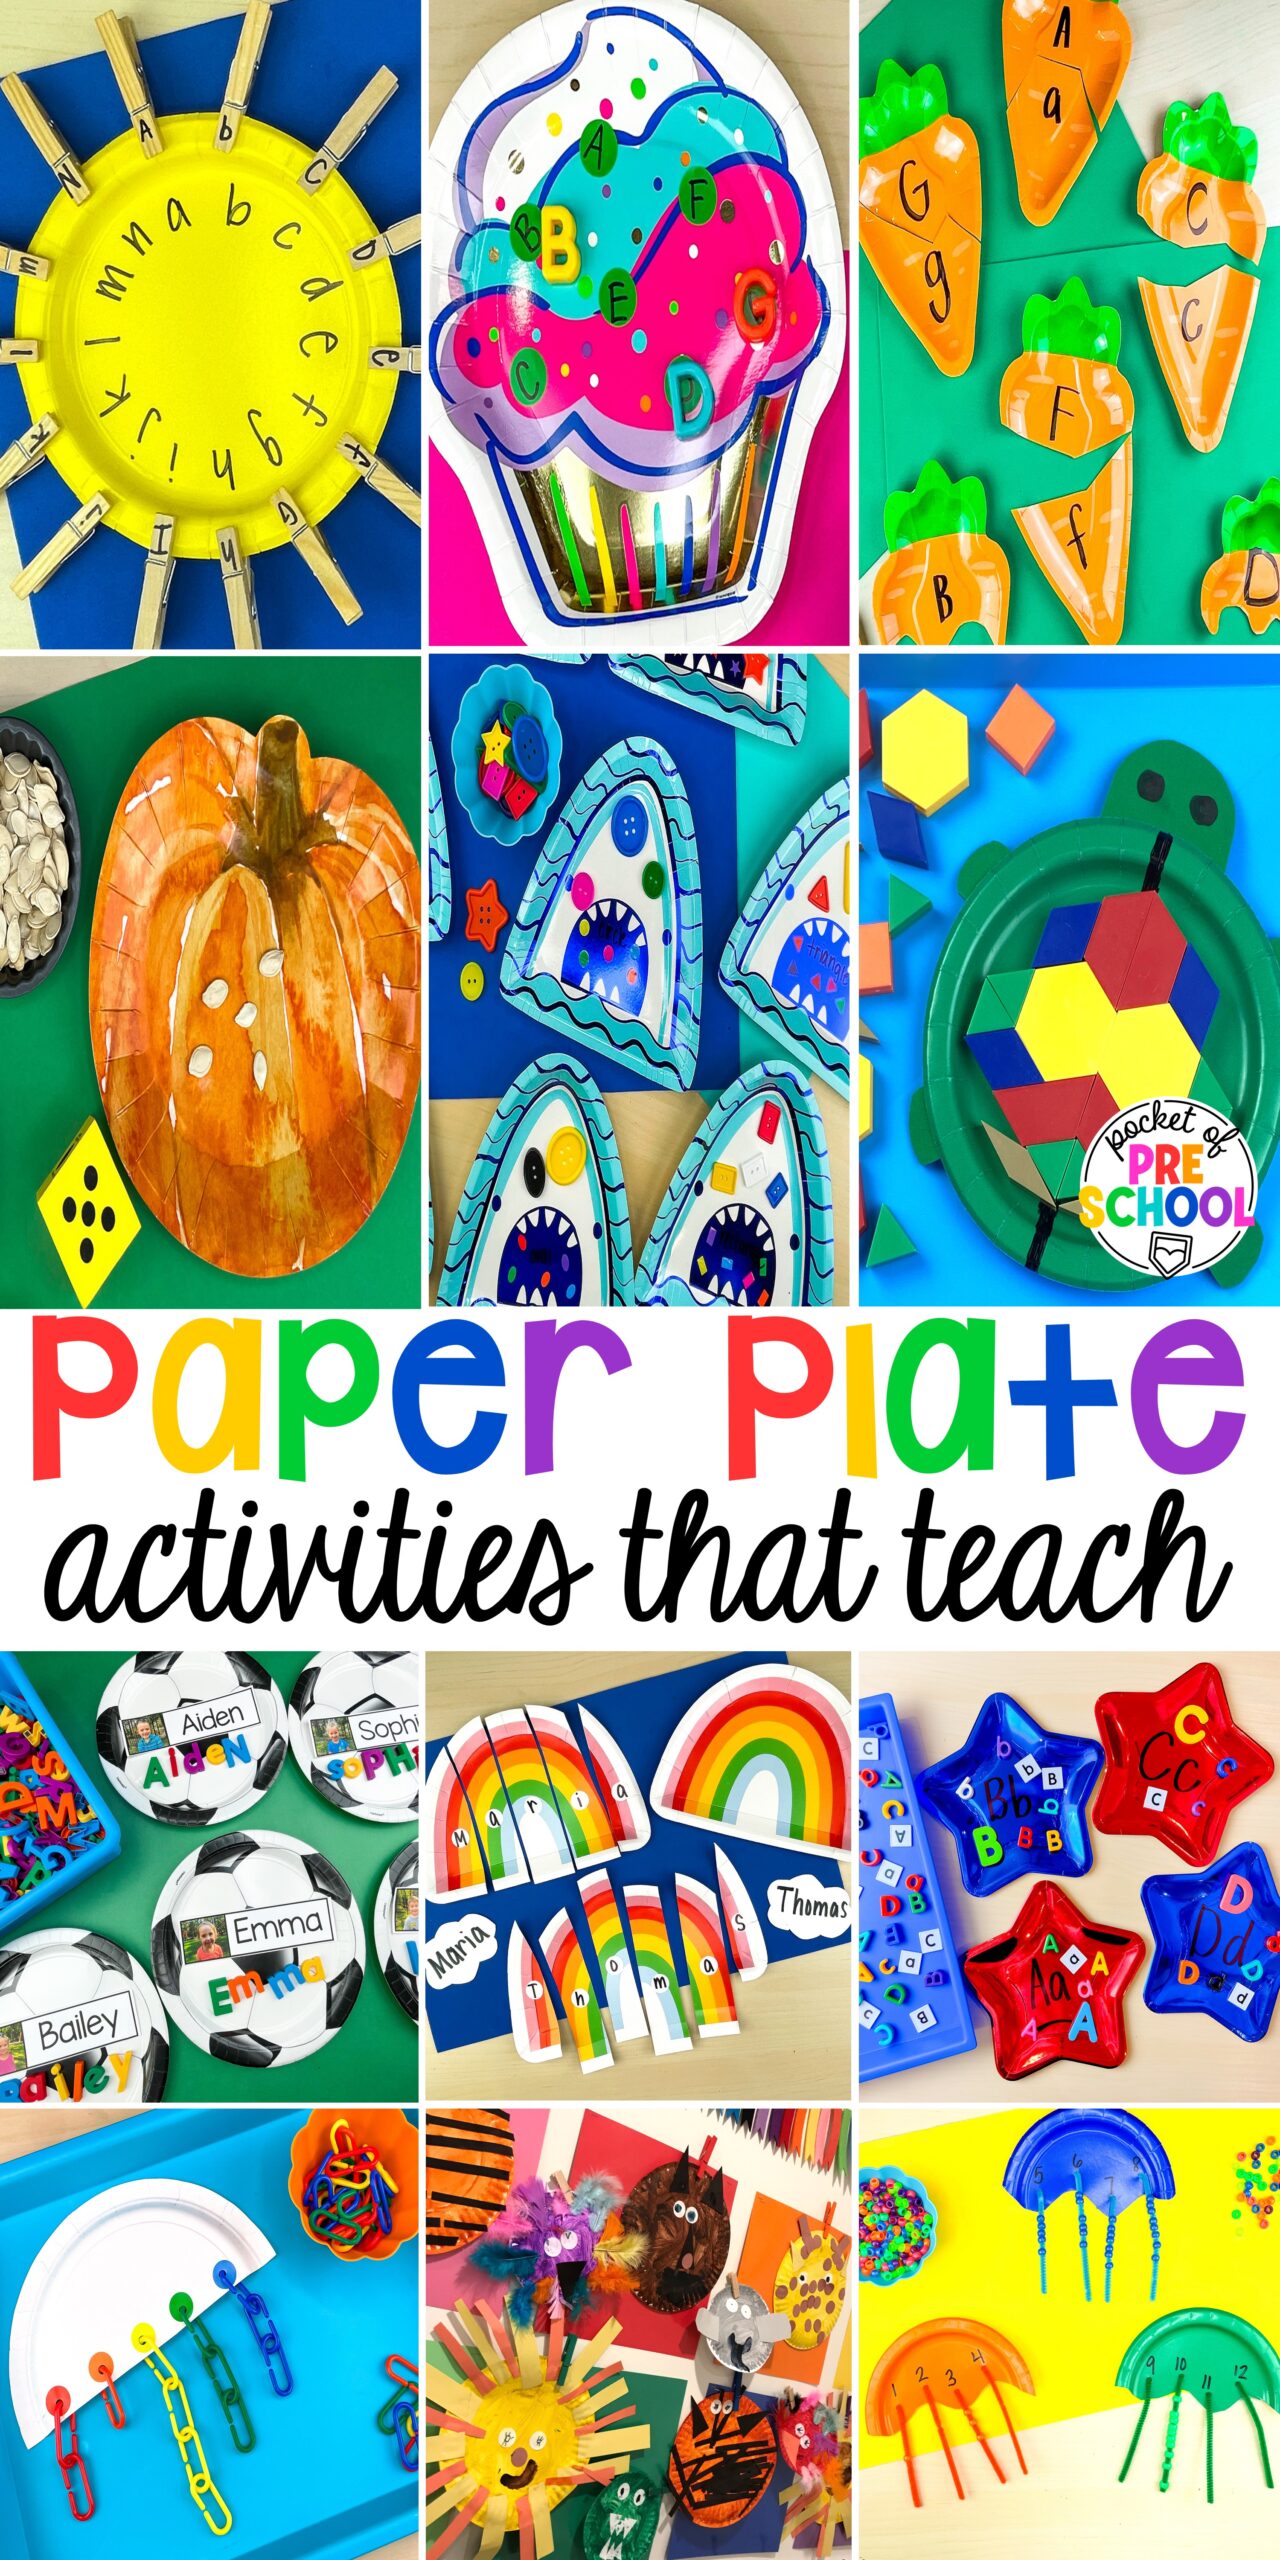 Check out these paper plate activities for improve literacy, math, fine motor, and more for preschool, pre-k, and kindergarten students.